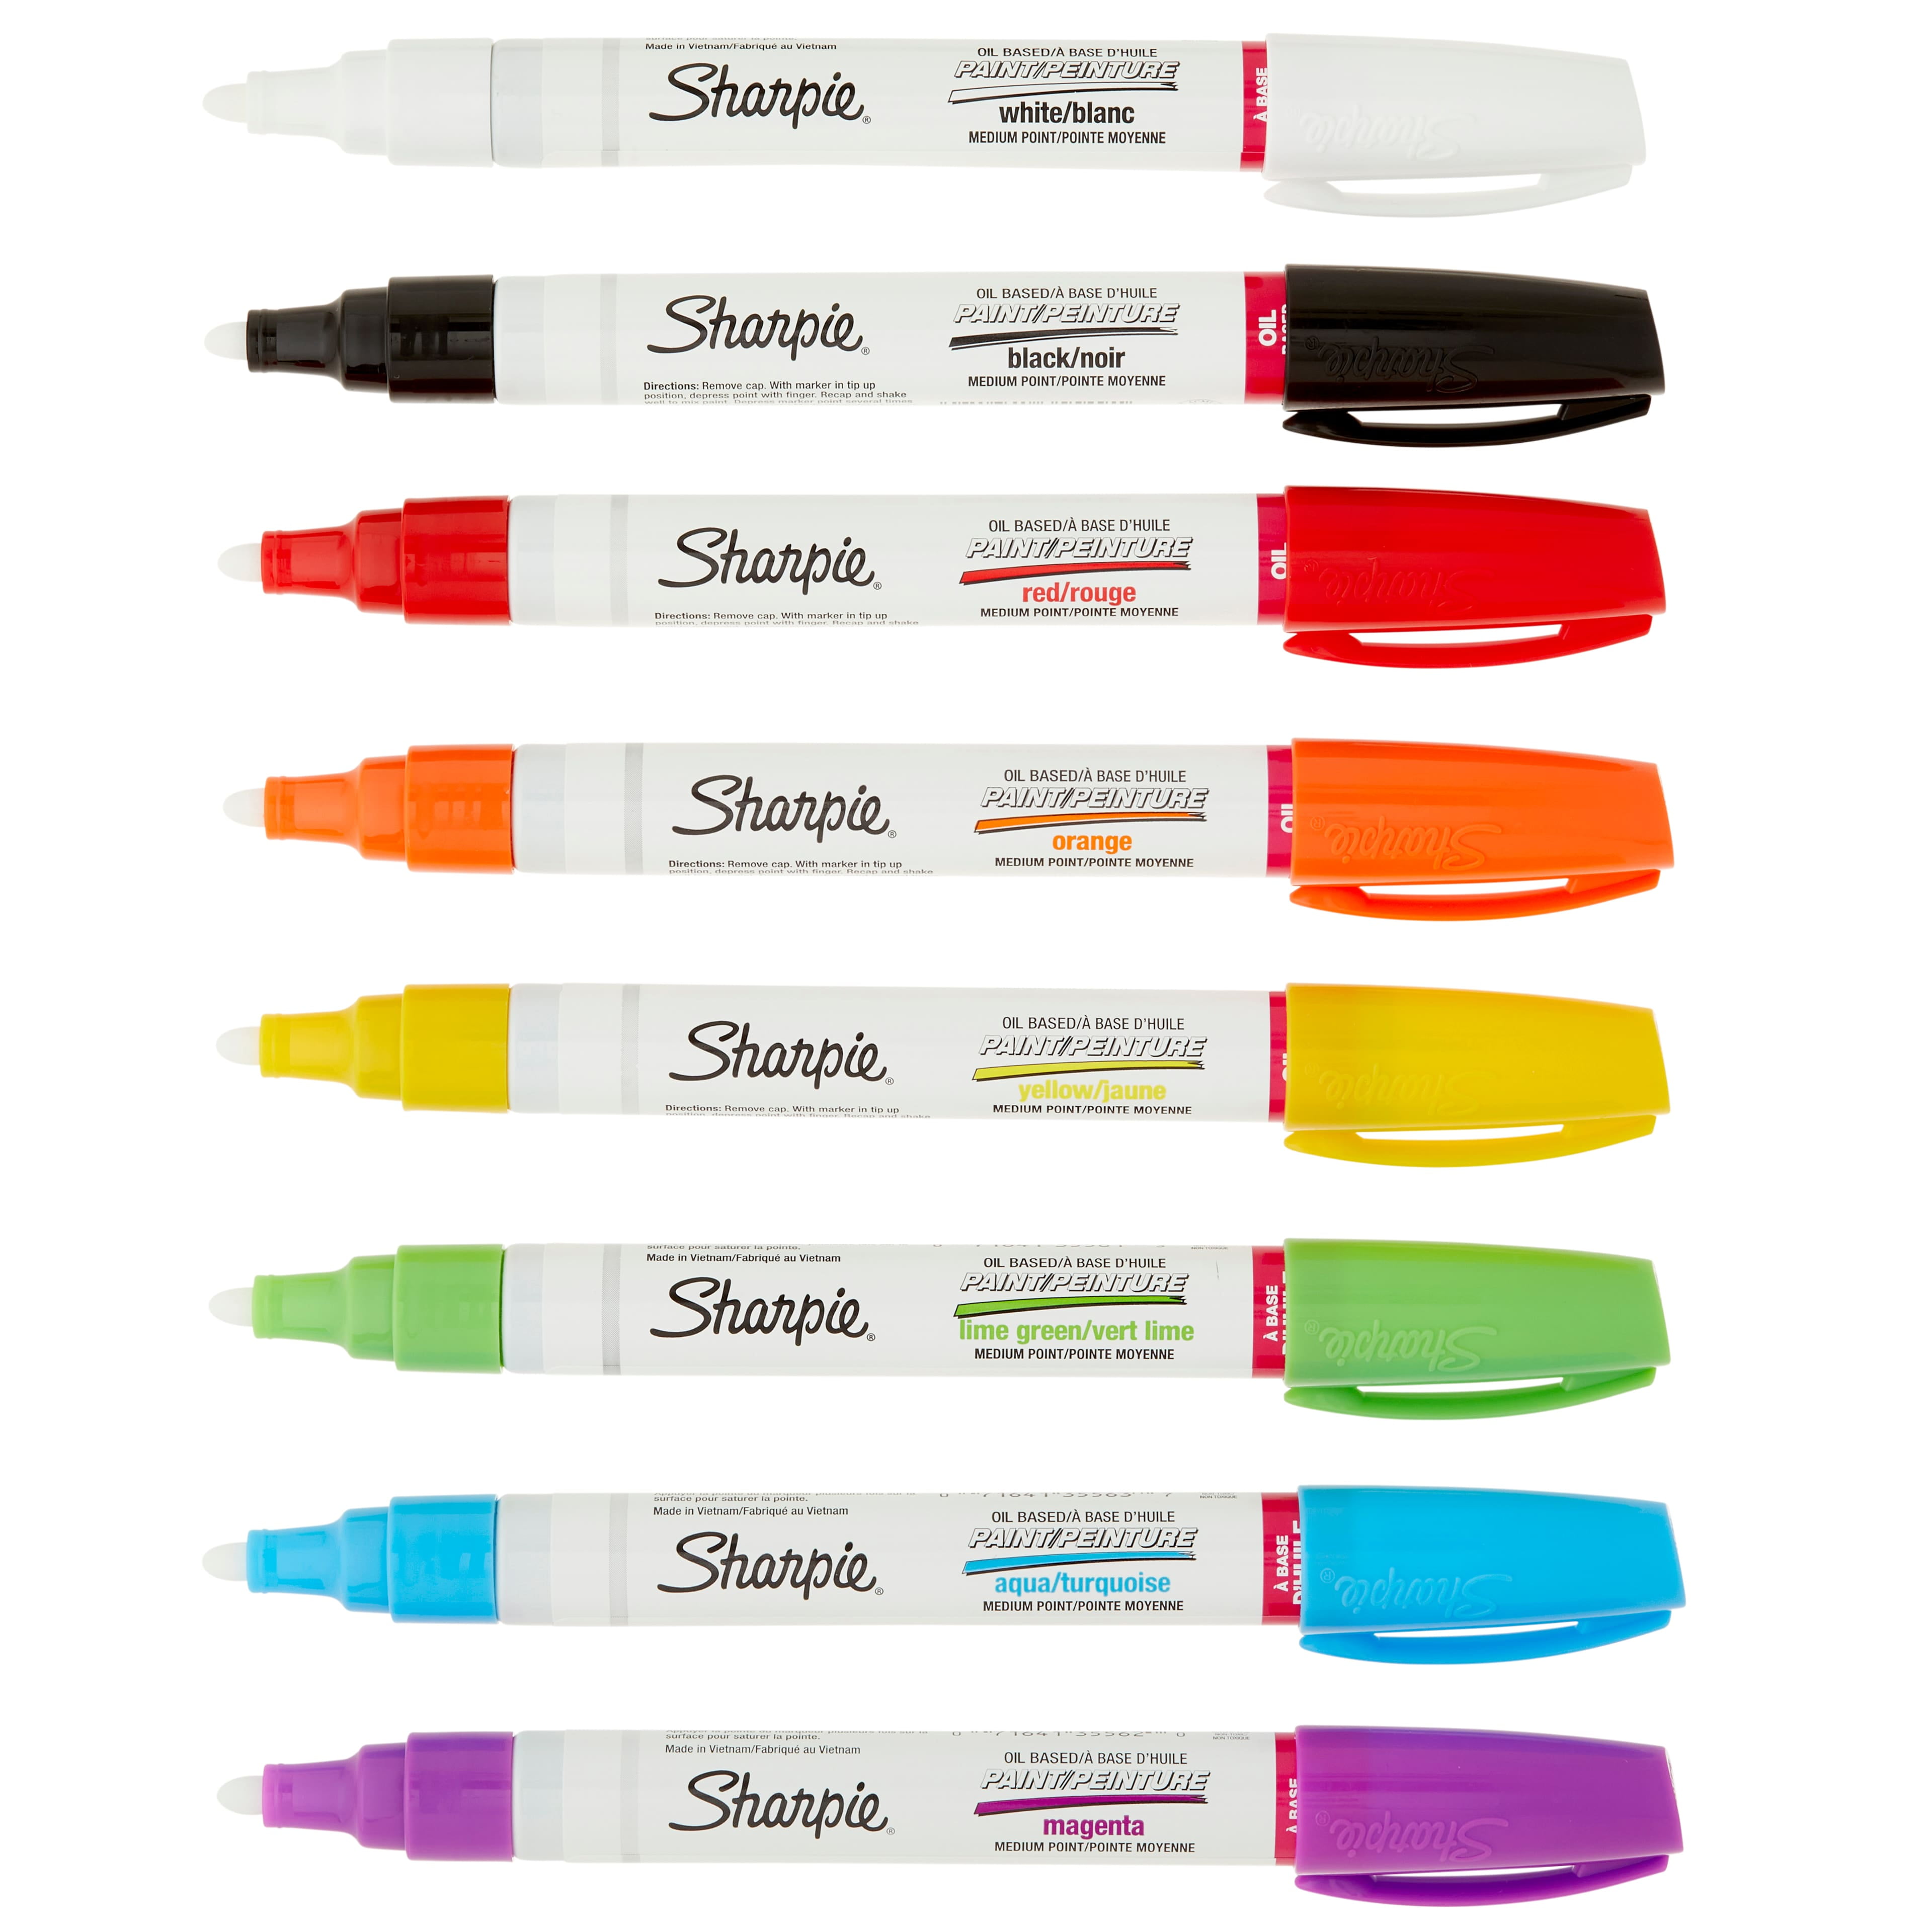 OIL-Based vs WATER-Based Paint Markers: Which is Better? - The Happy Ever  Crafter